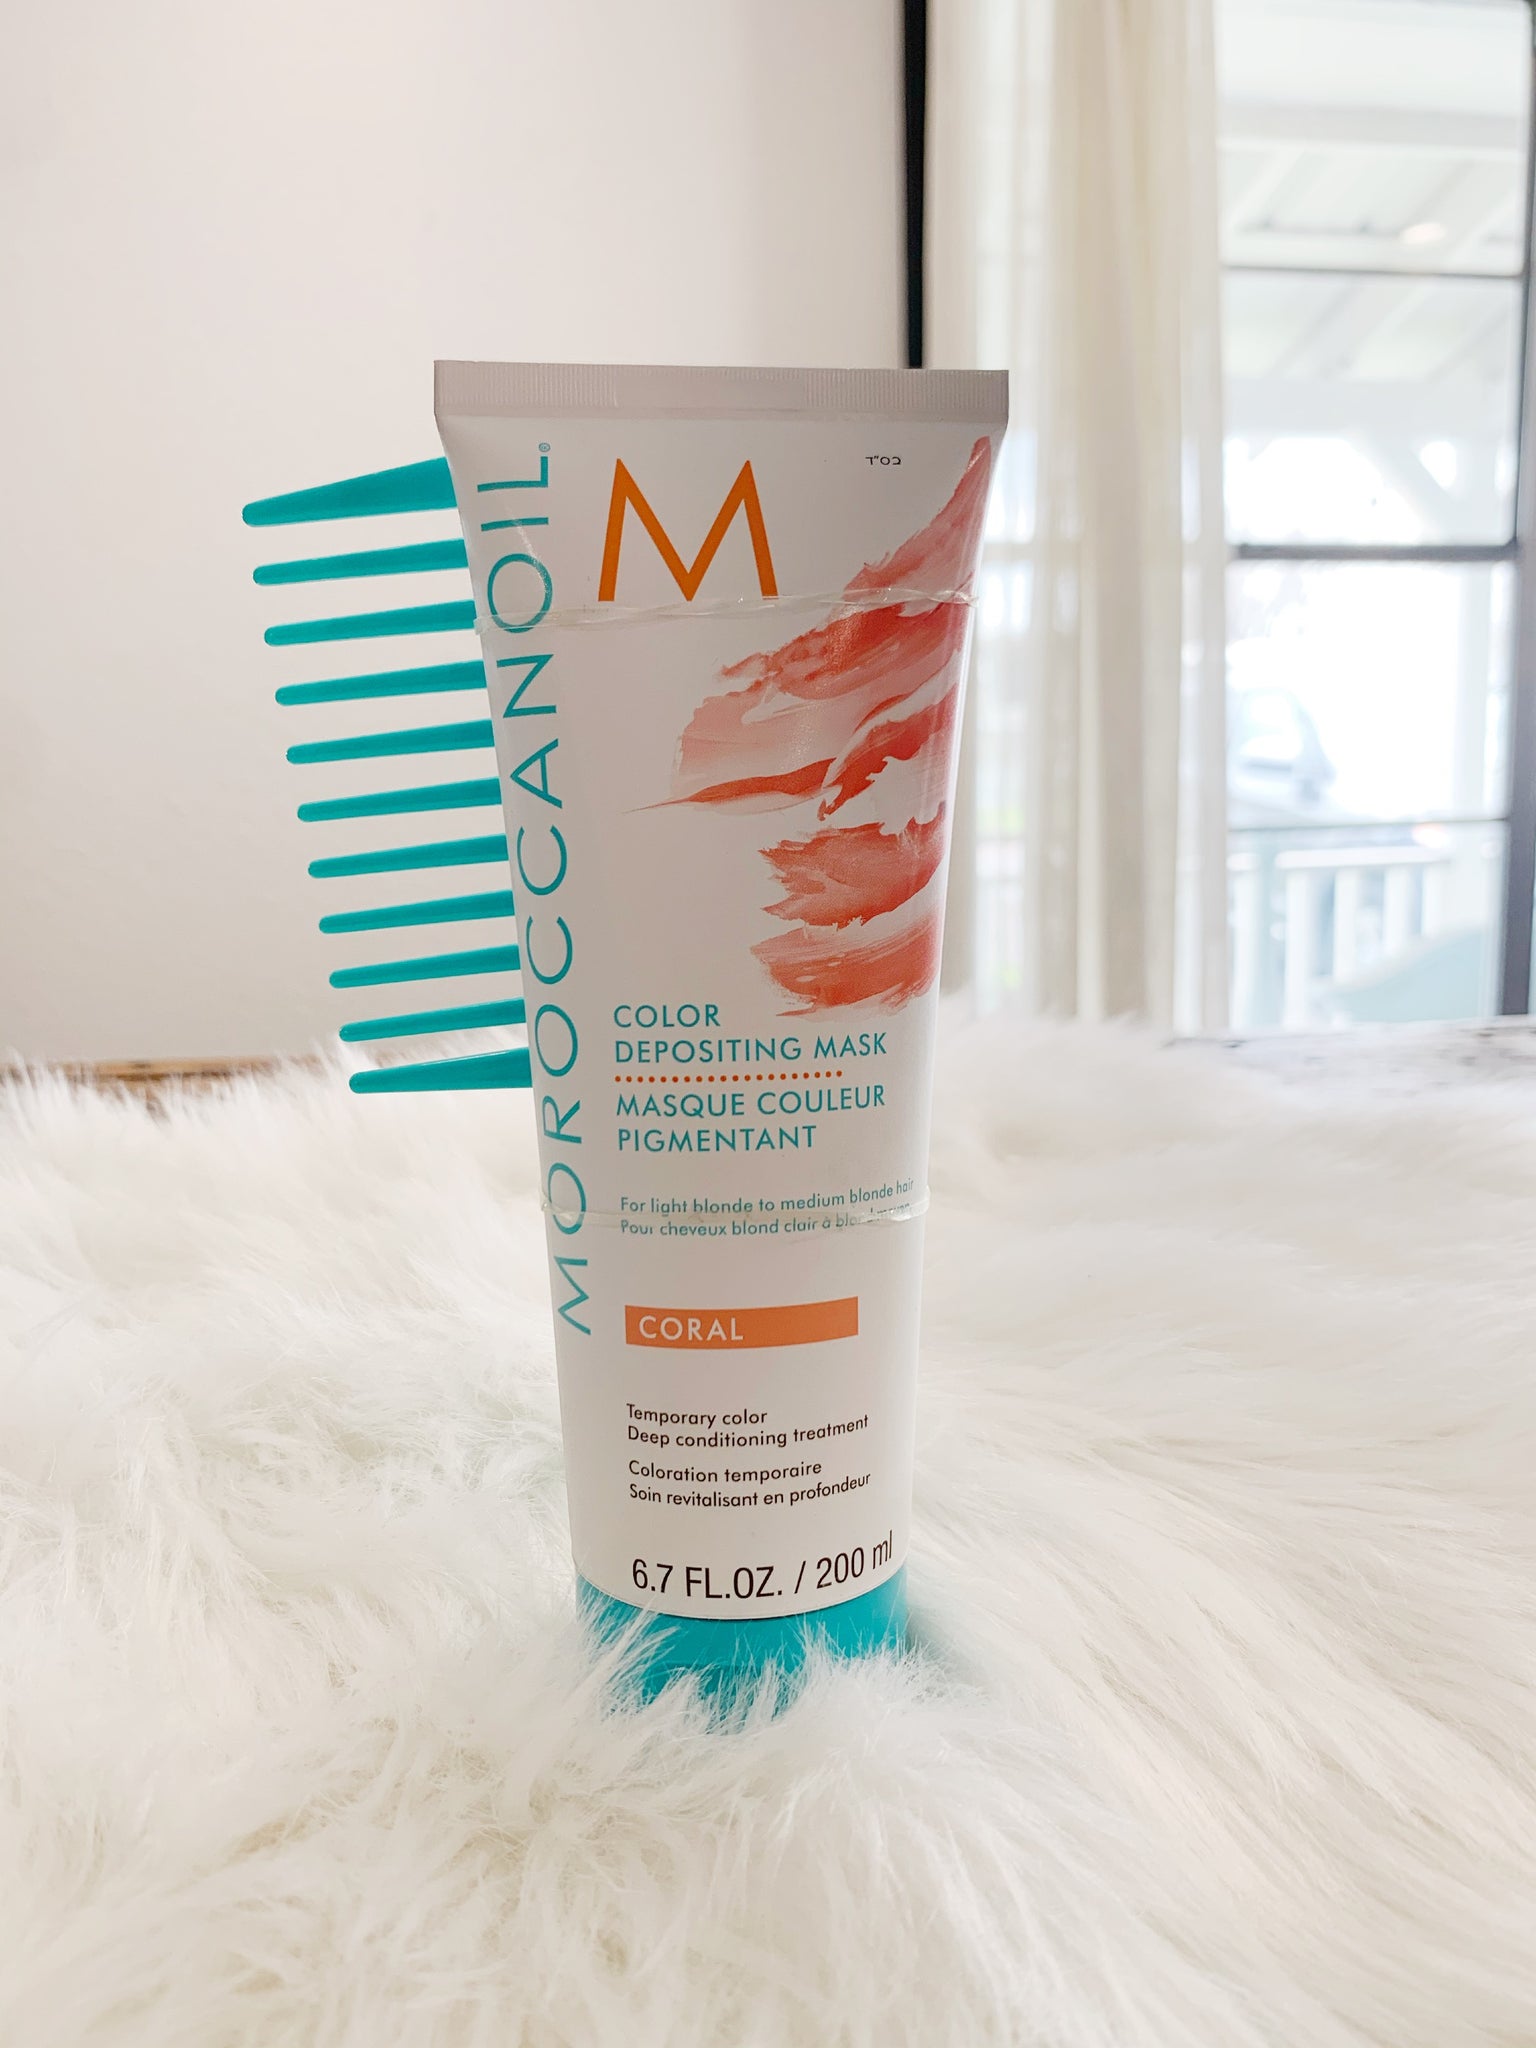 Moroccan Oil Coral Depositing Mask